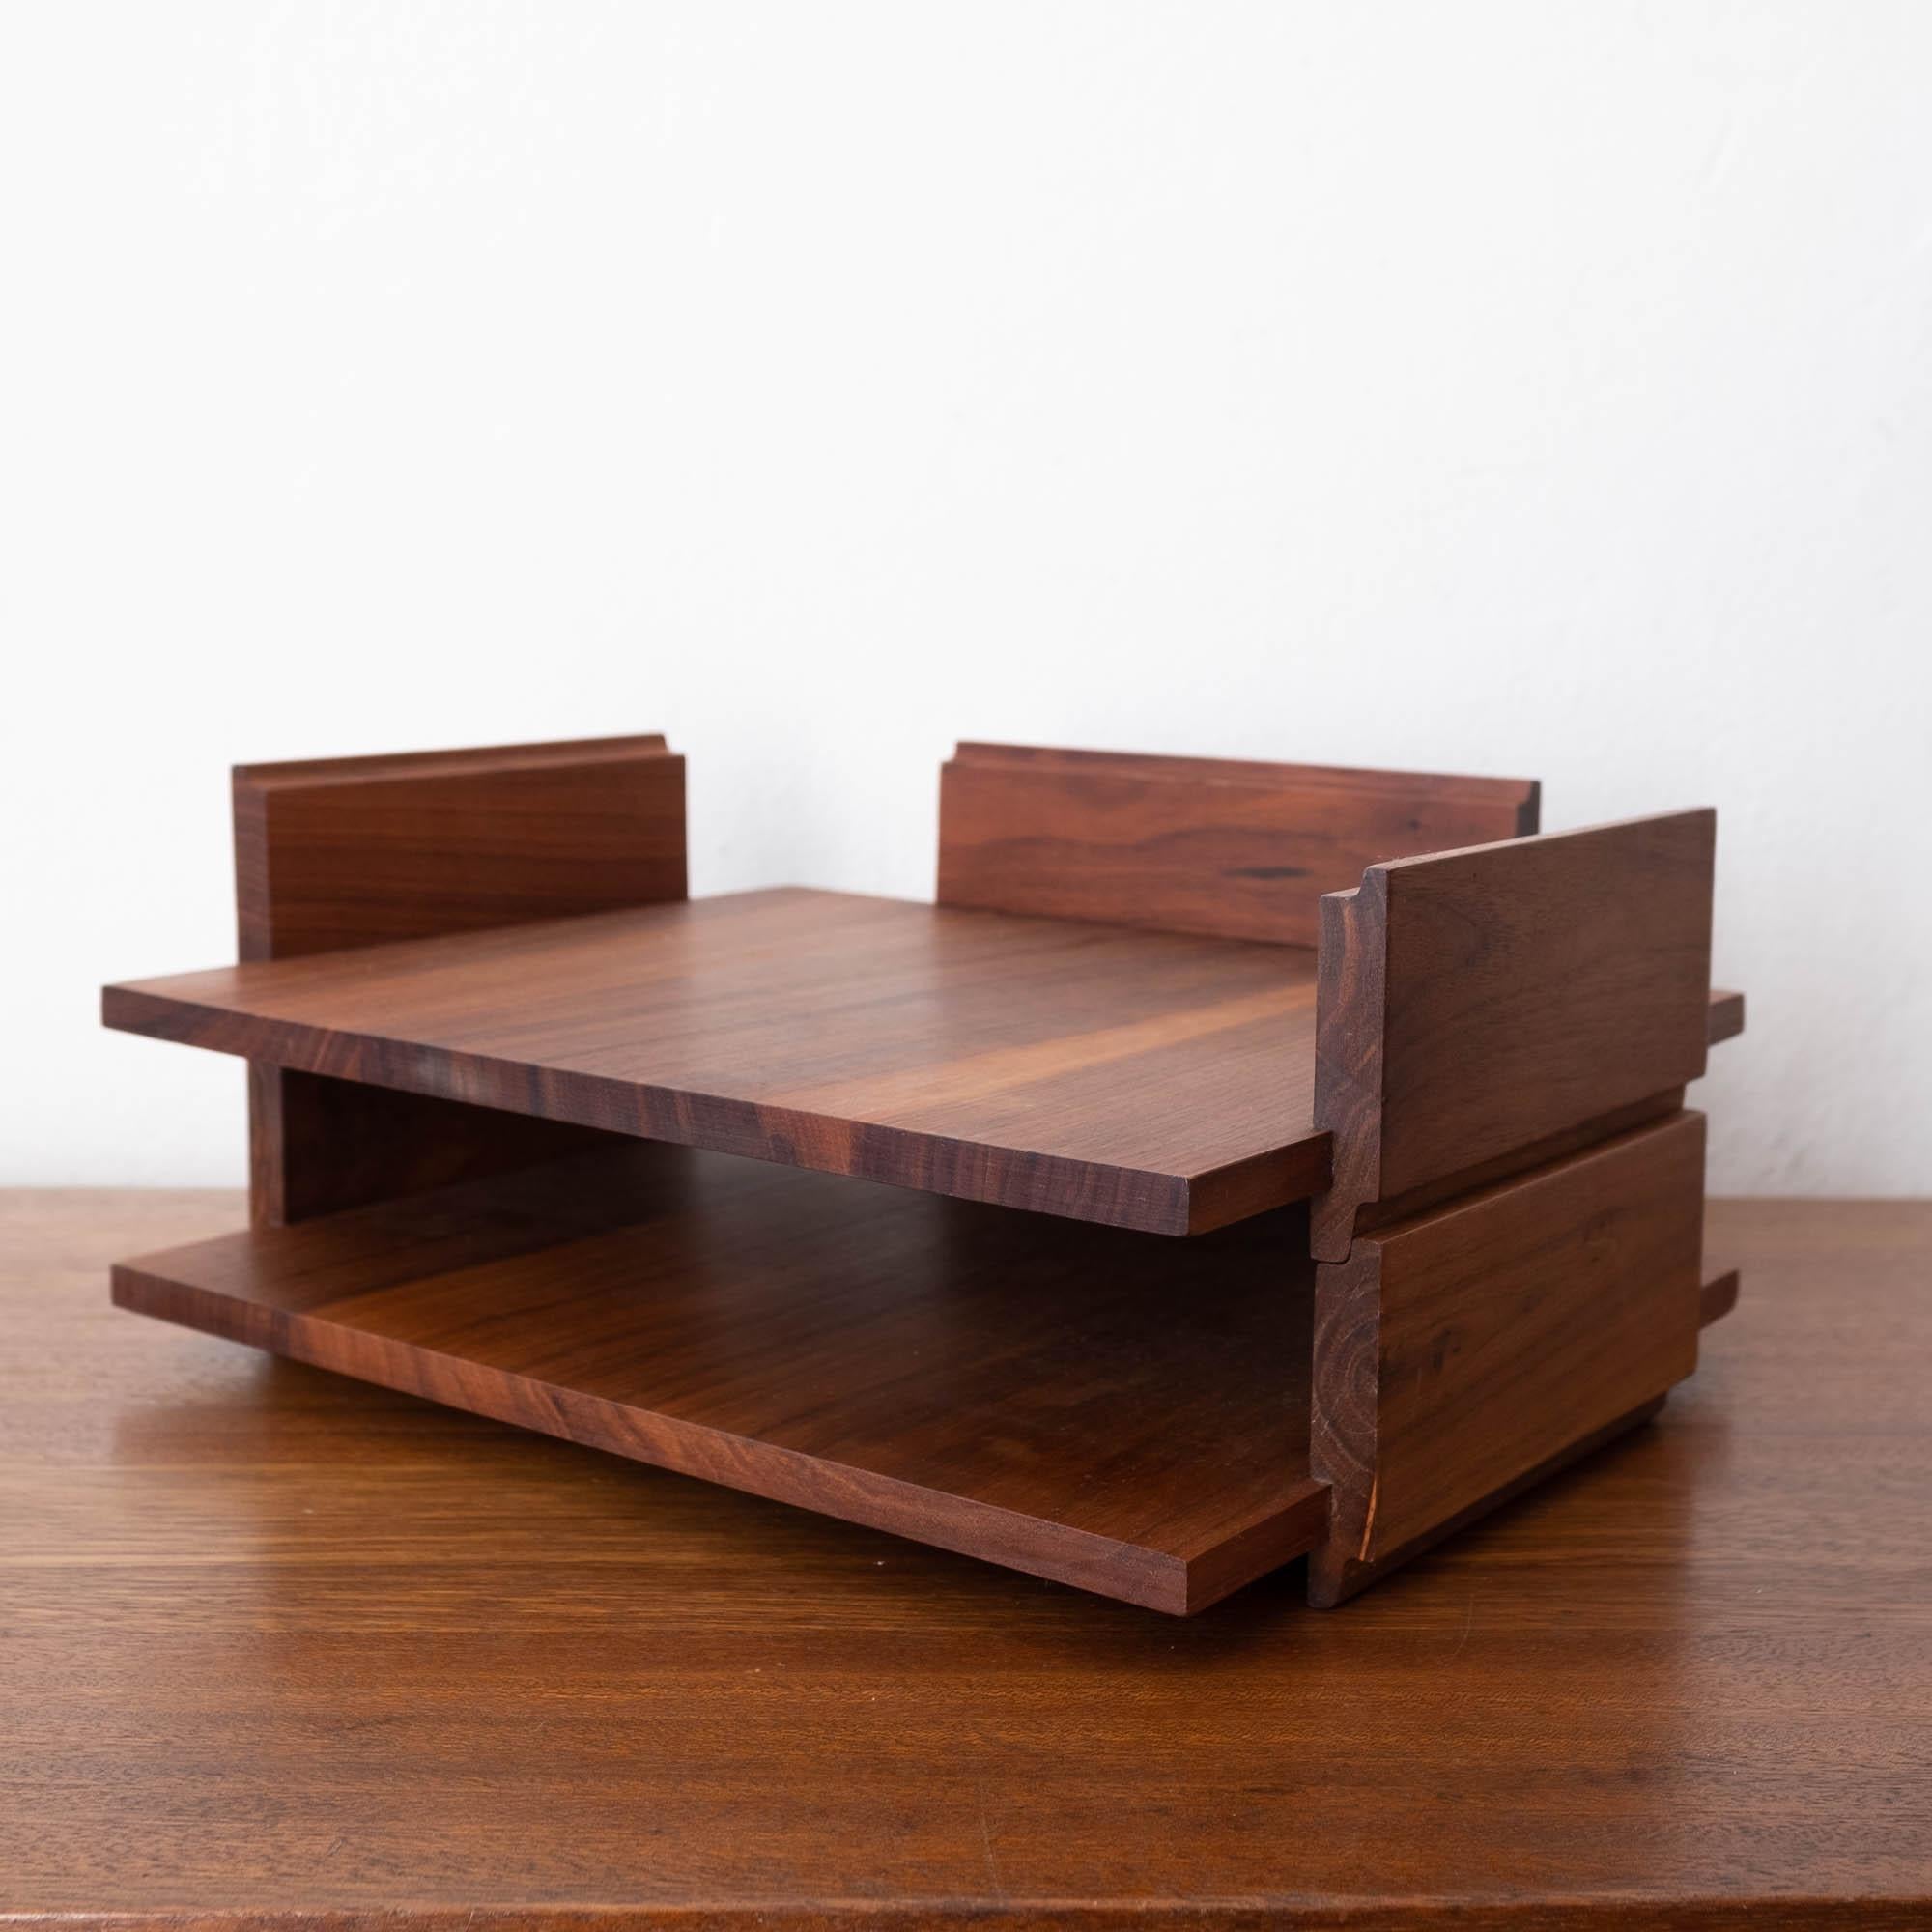 Solid walnut two tier letter tray. Can be used as two single trays. Beautiful grain.